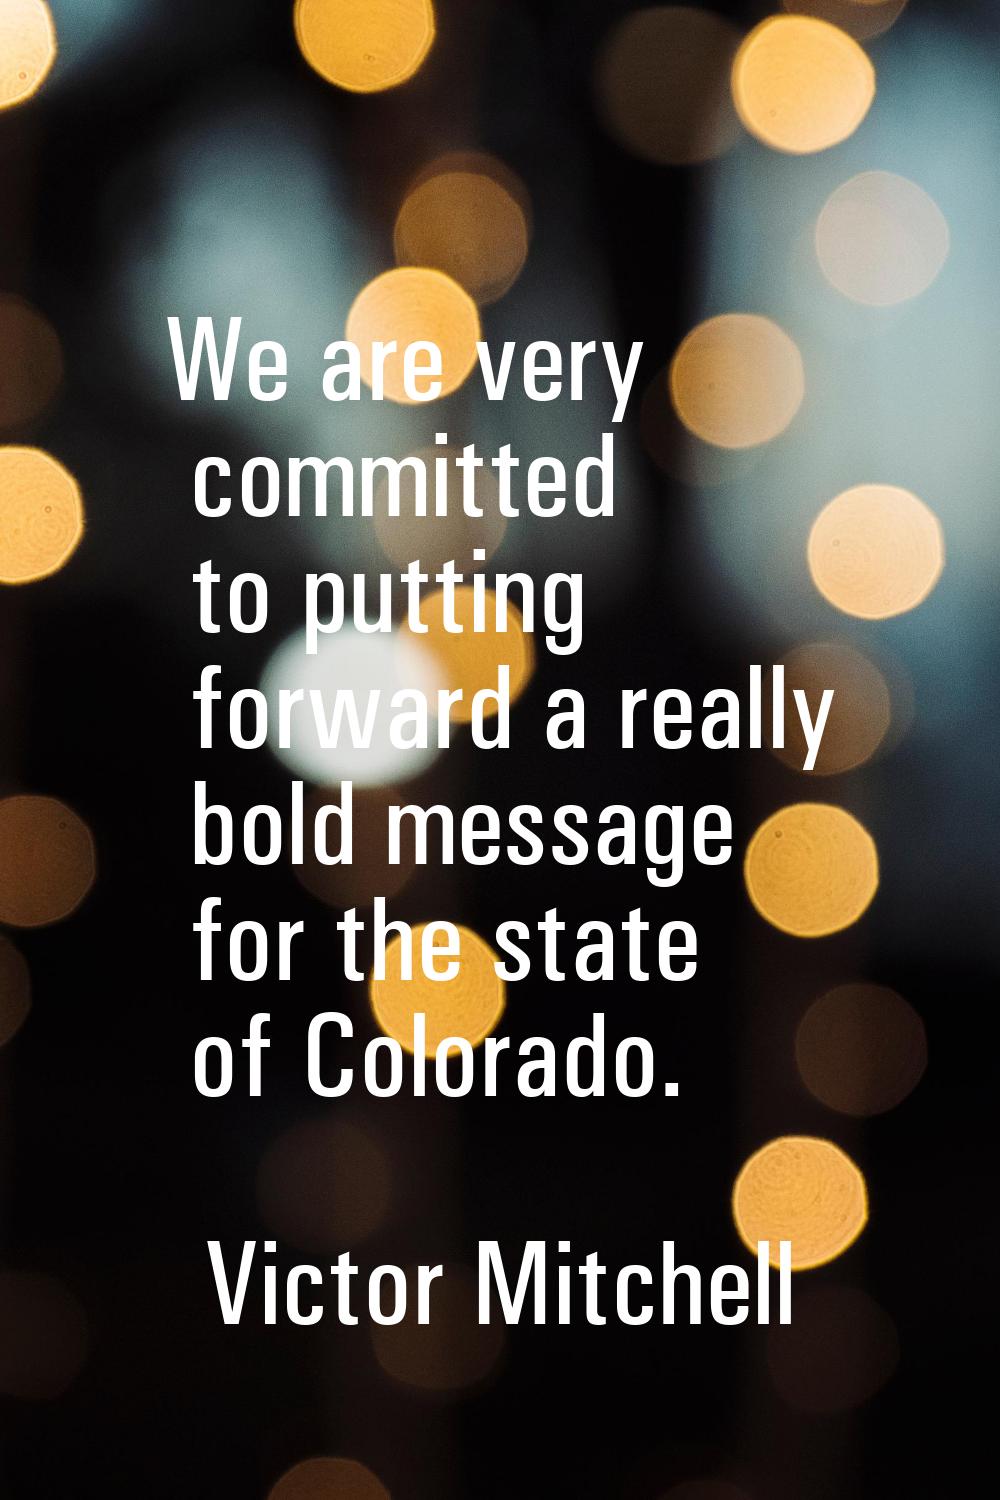 We are very committed to putting forward a really bold message for the state of Colorado.